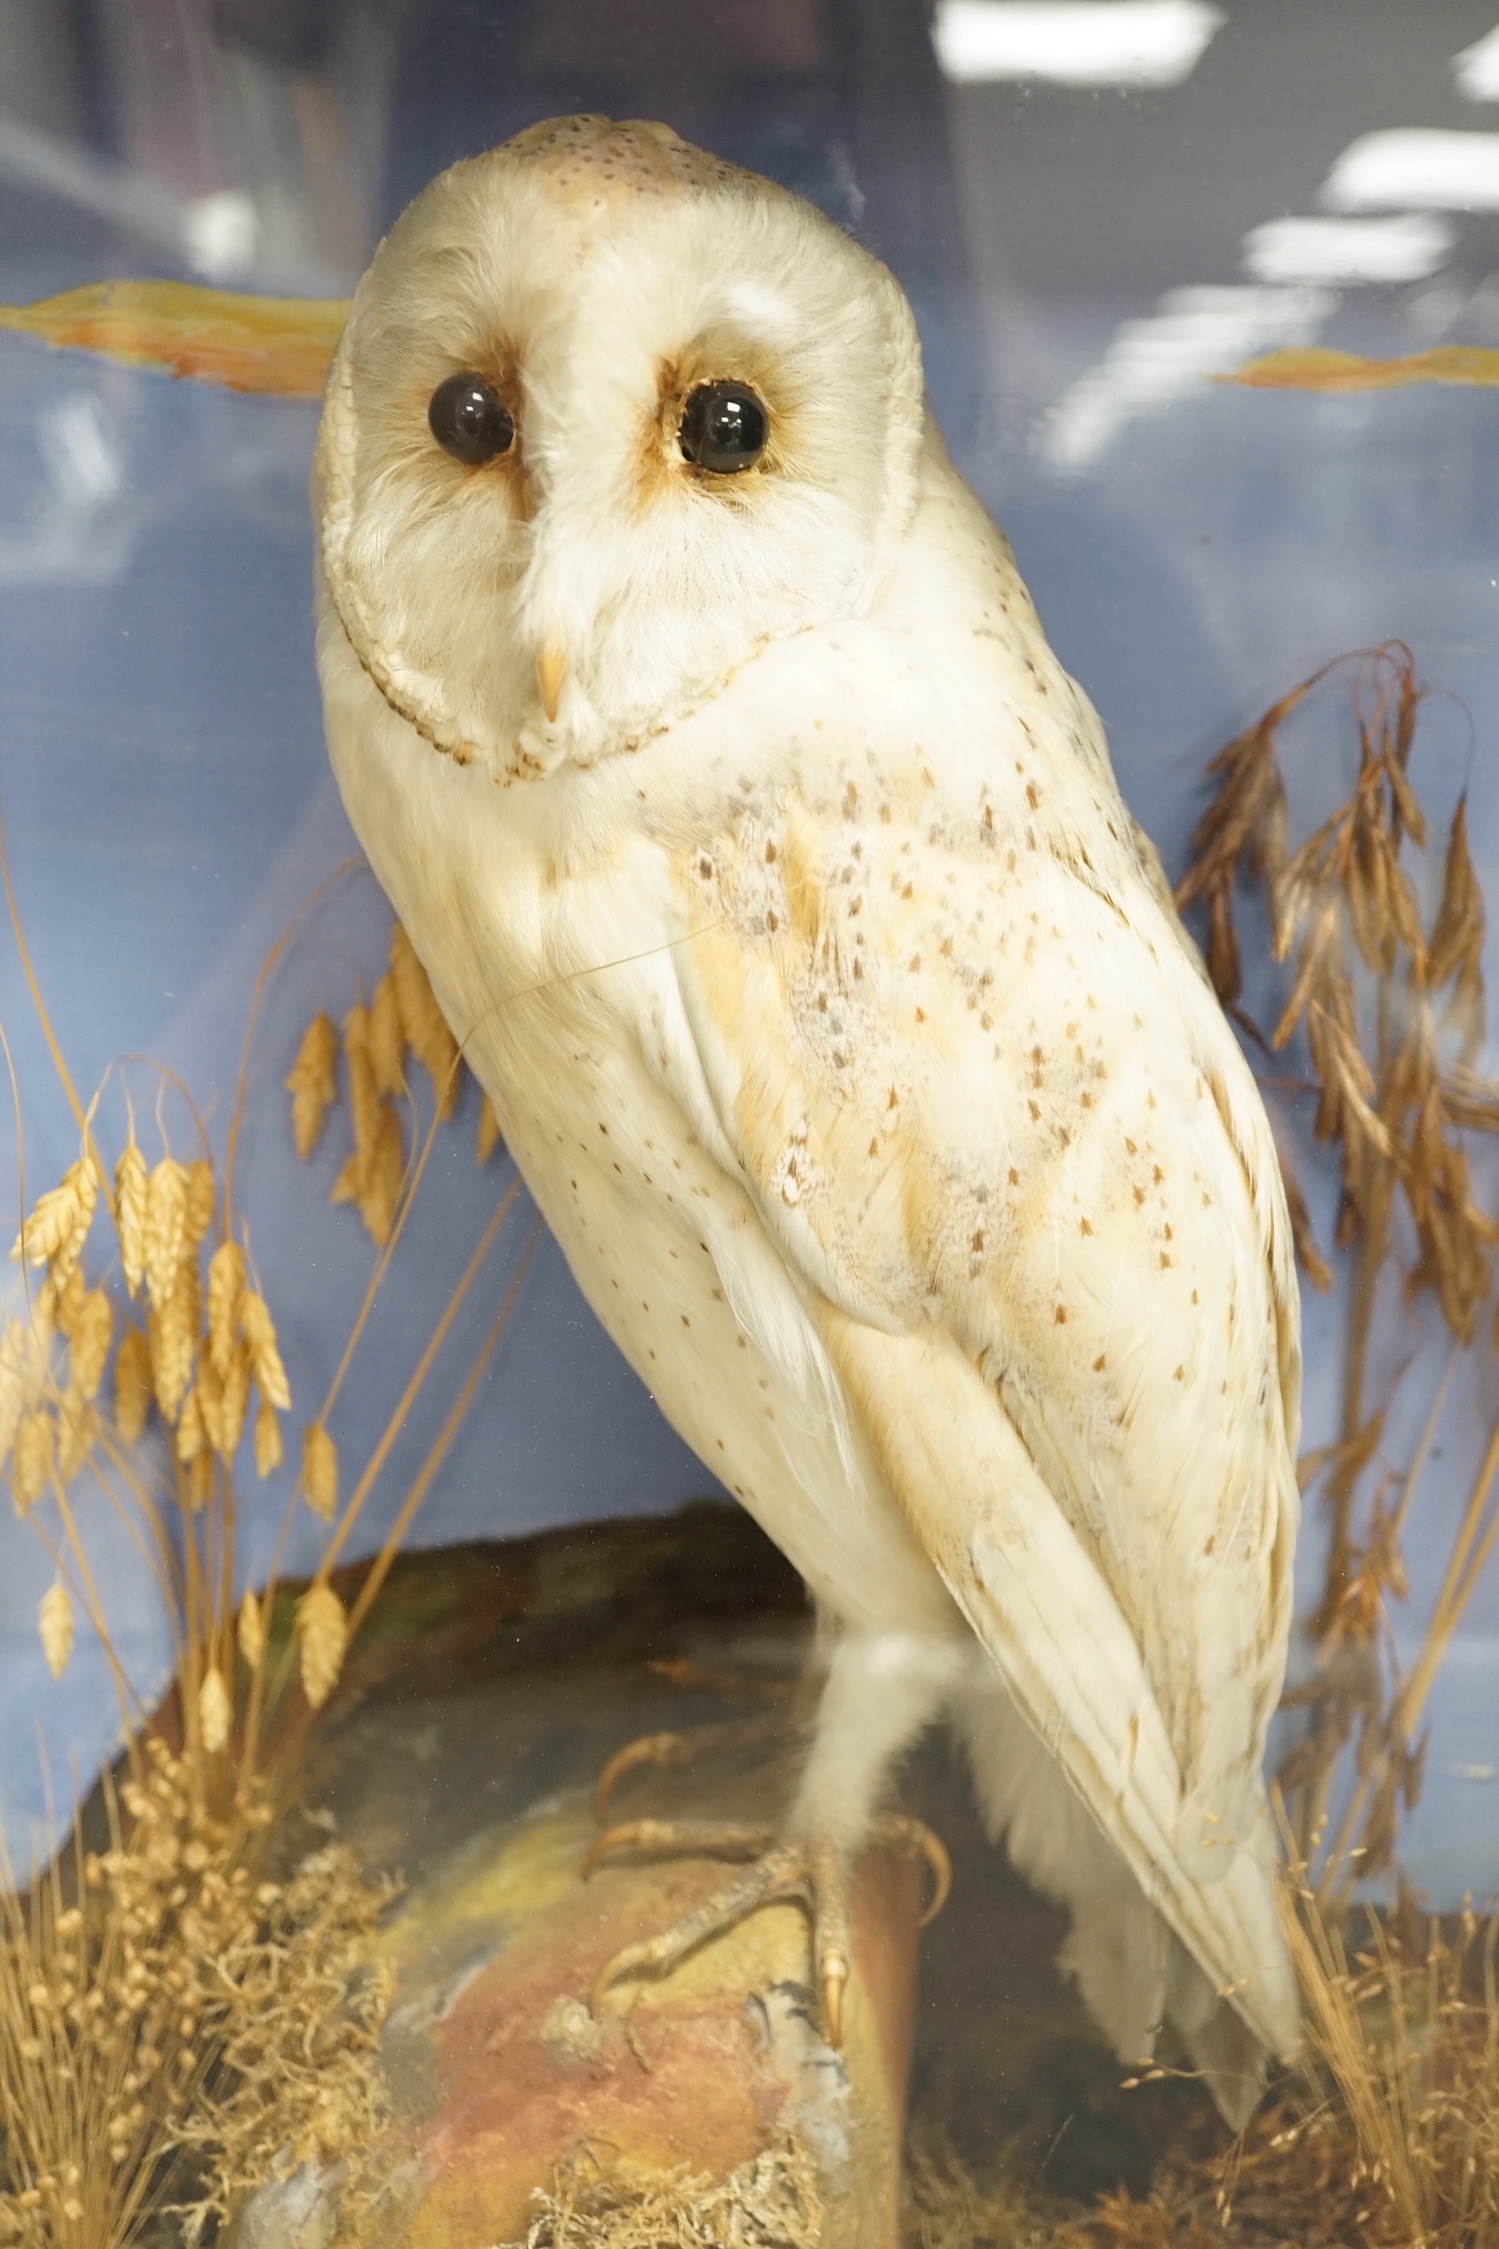 A taxidermy perched barn owl by G&J Ambrose, Colchester in glazed wooden case - 40cm high